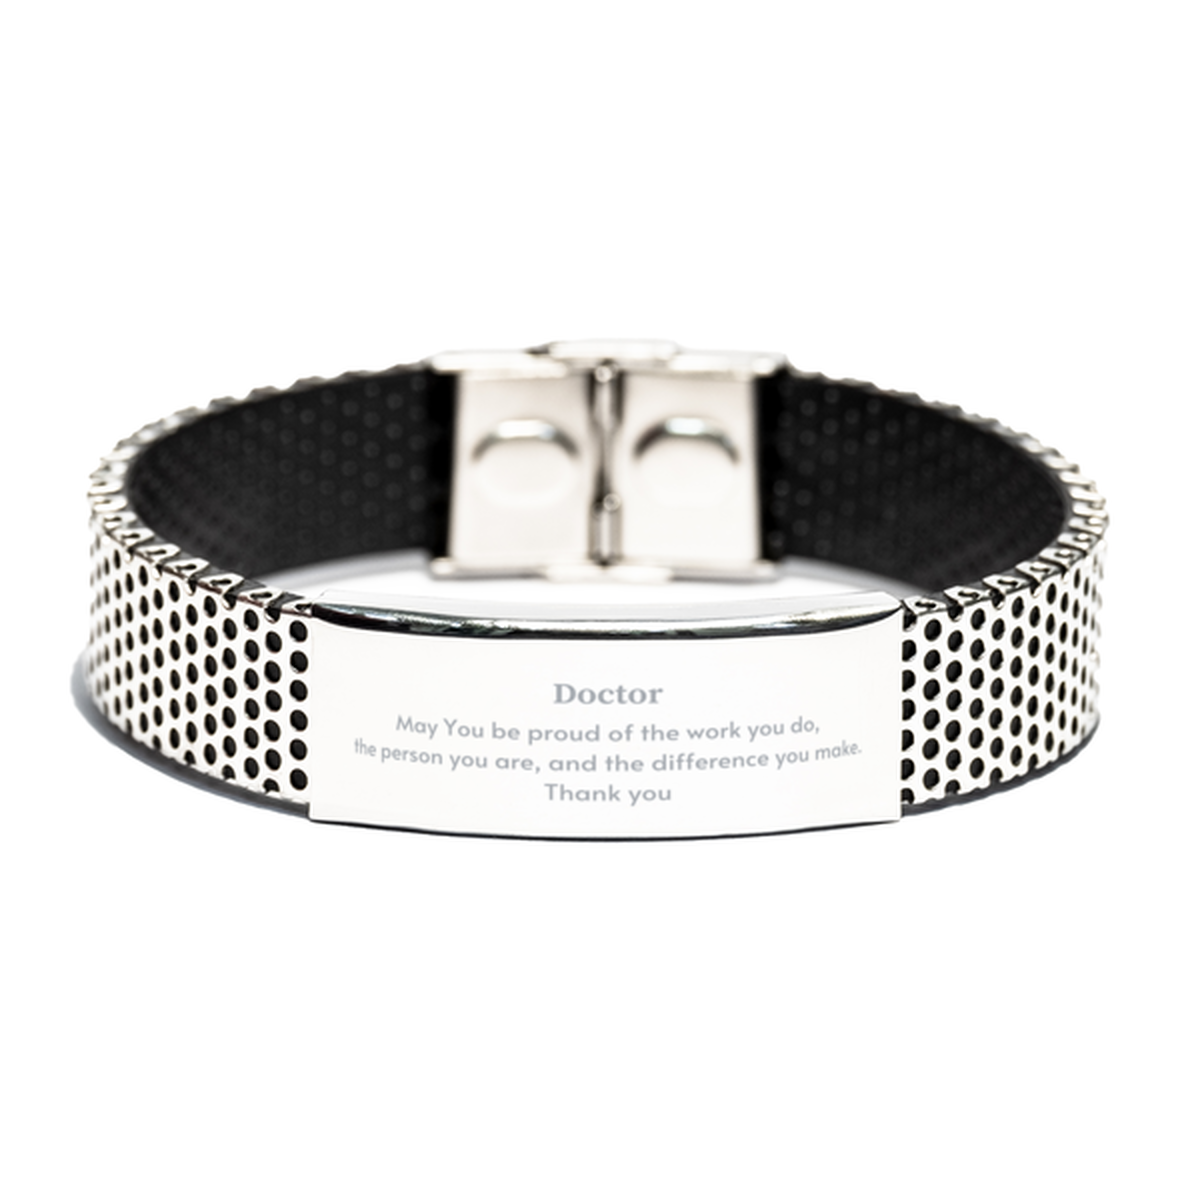 Heartwarming Stainless Steel Bracelet Retirement Coworkers Gifts for Doctor, Doctor May You be proud of the work you do, the person you are Gifts for Boss Men Women Friends